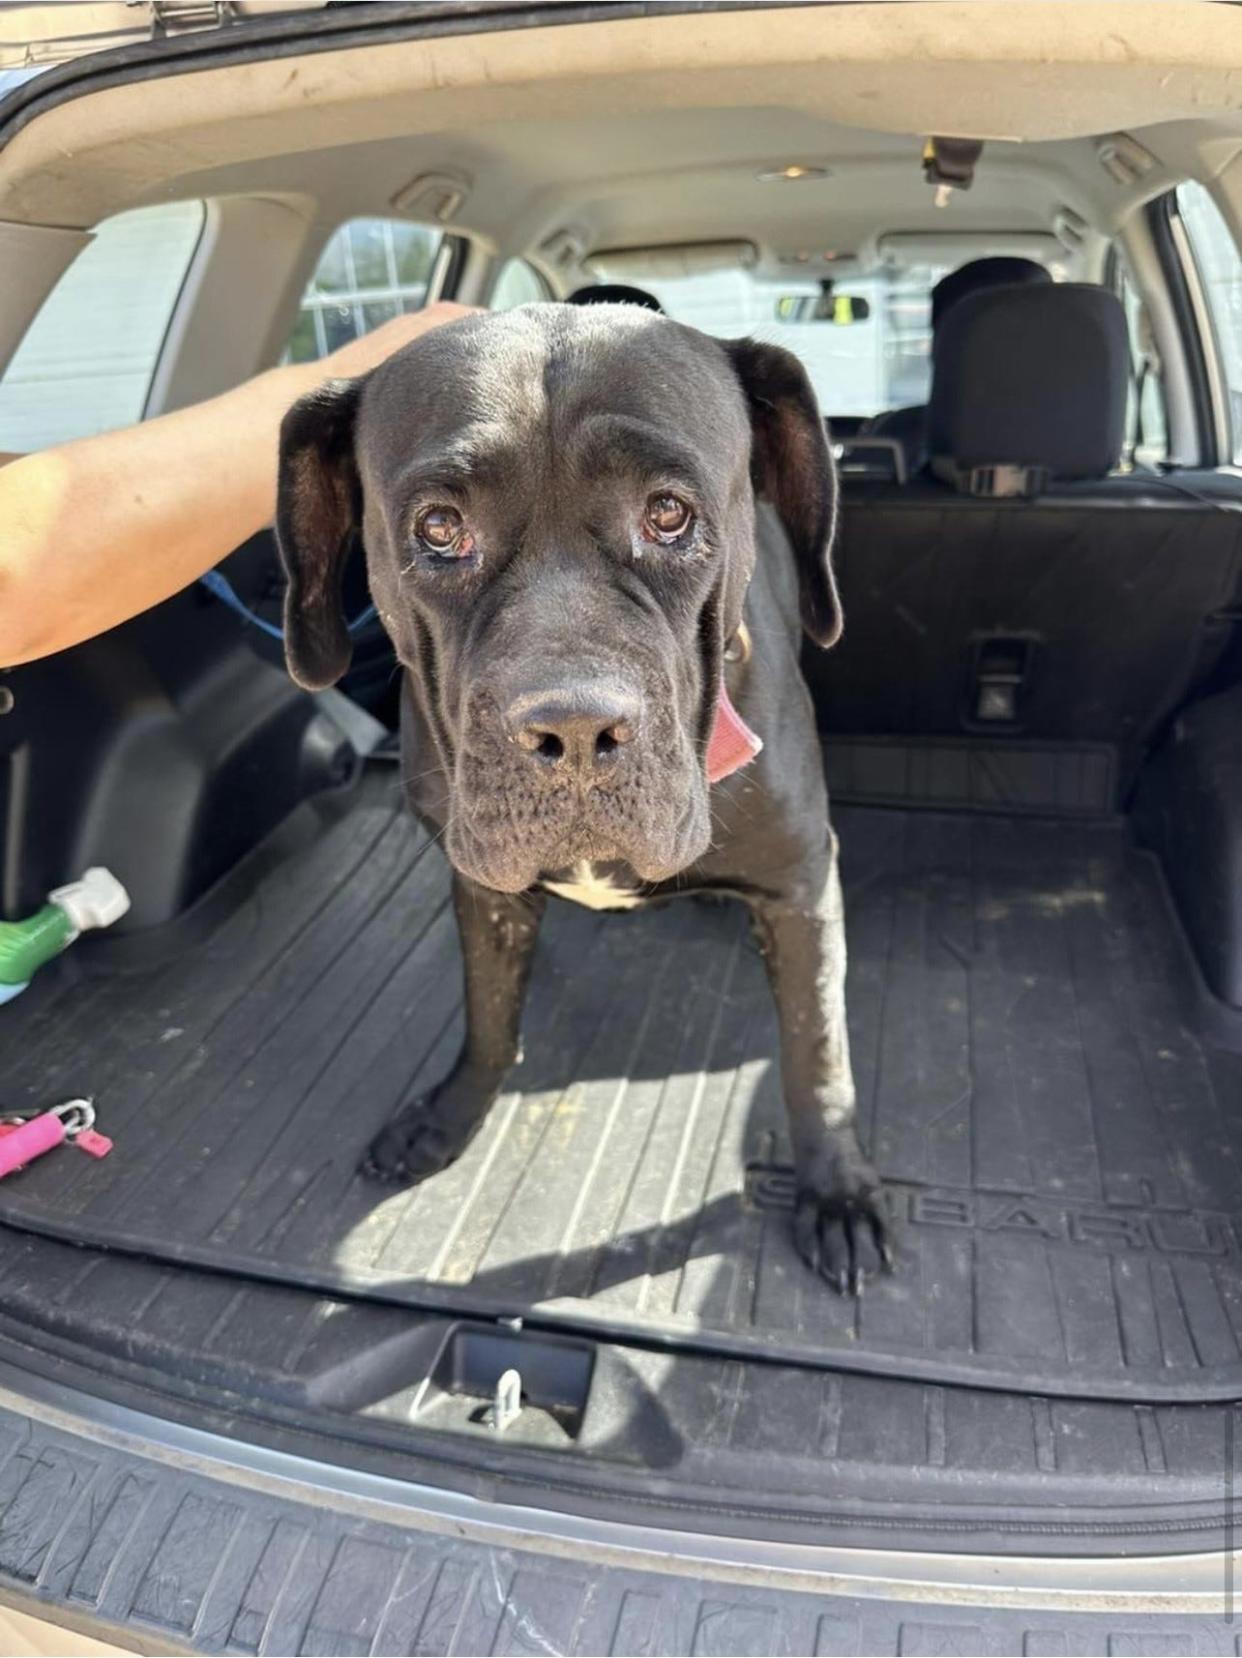 A picture of one of 24 malnourished adult cane corso dogs that were rescued during a search warrant in Jackson on Saturday, July 8.